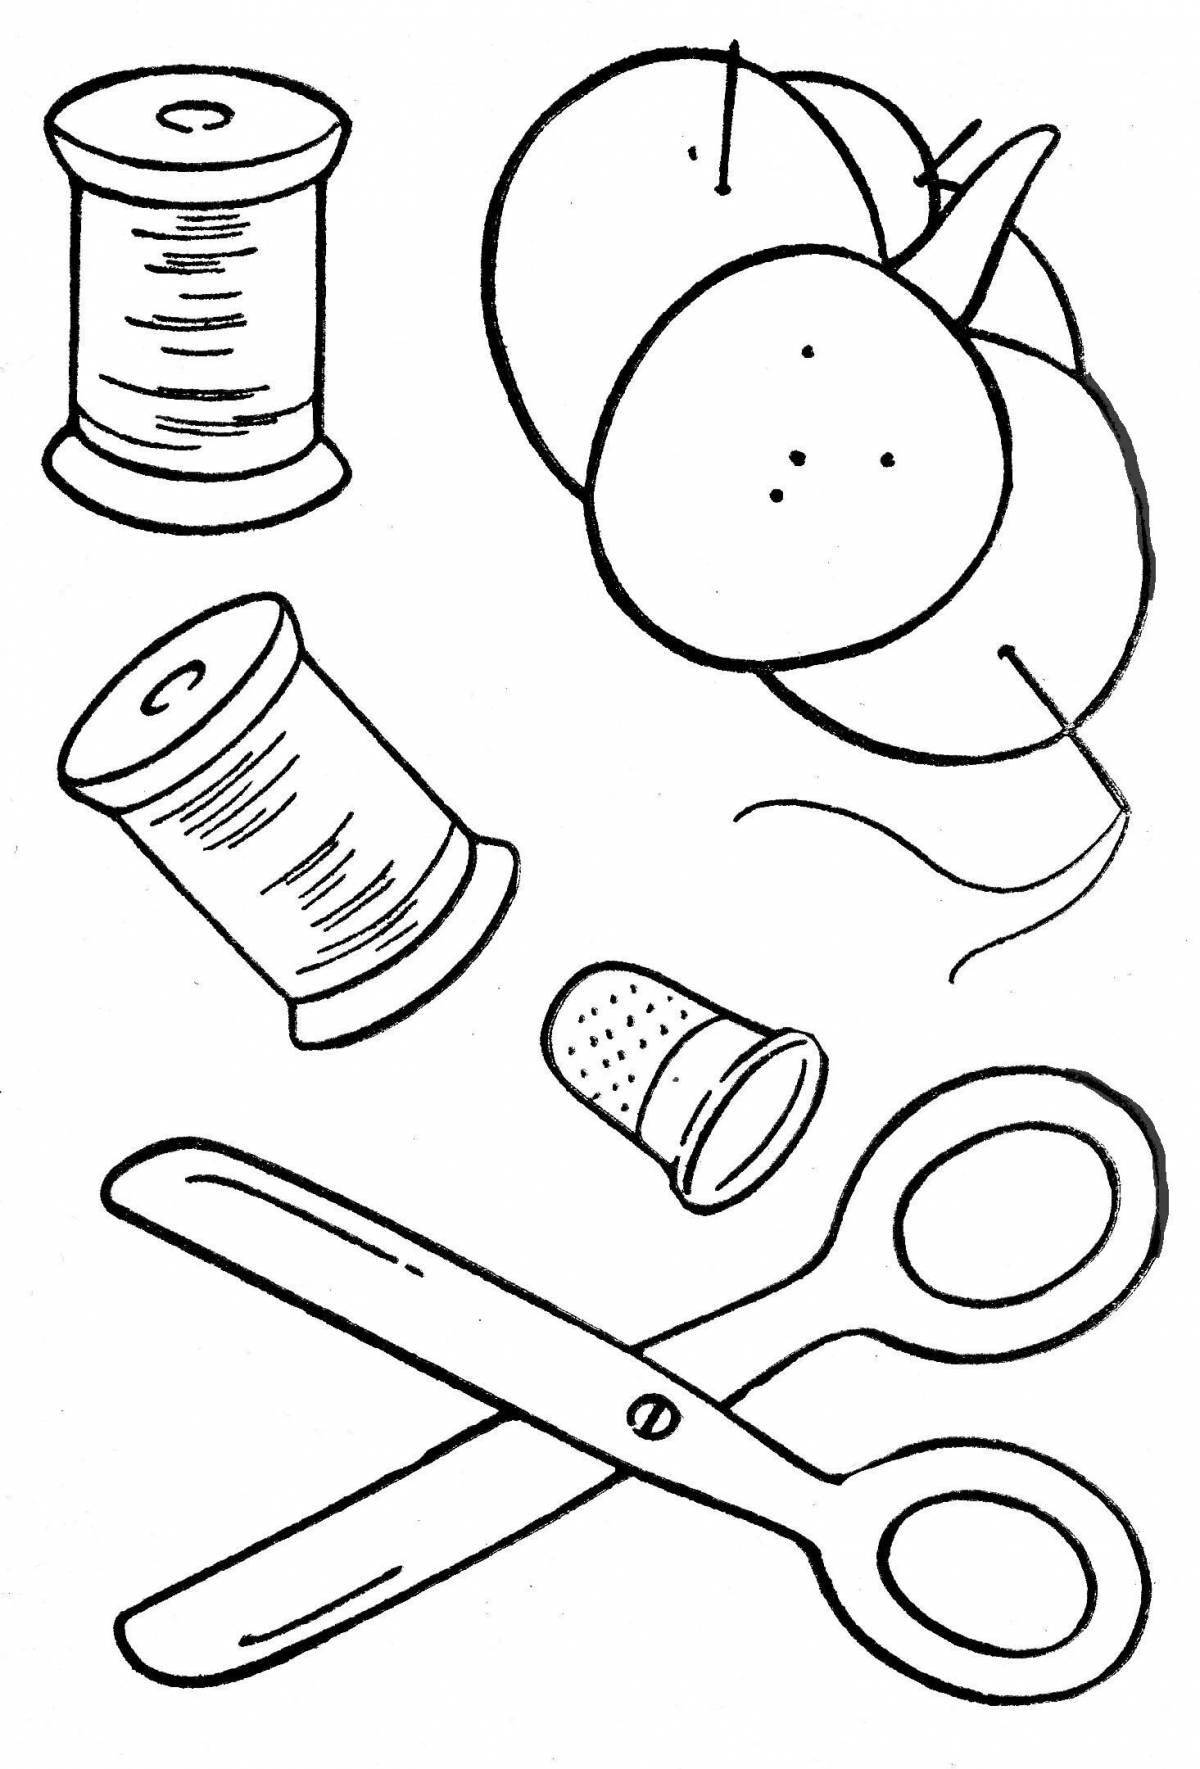 Adorable threads for coloring for children